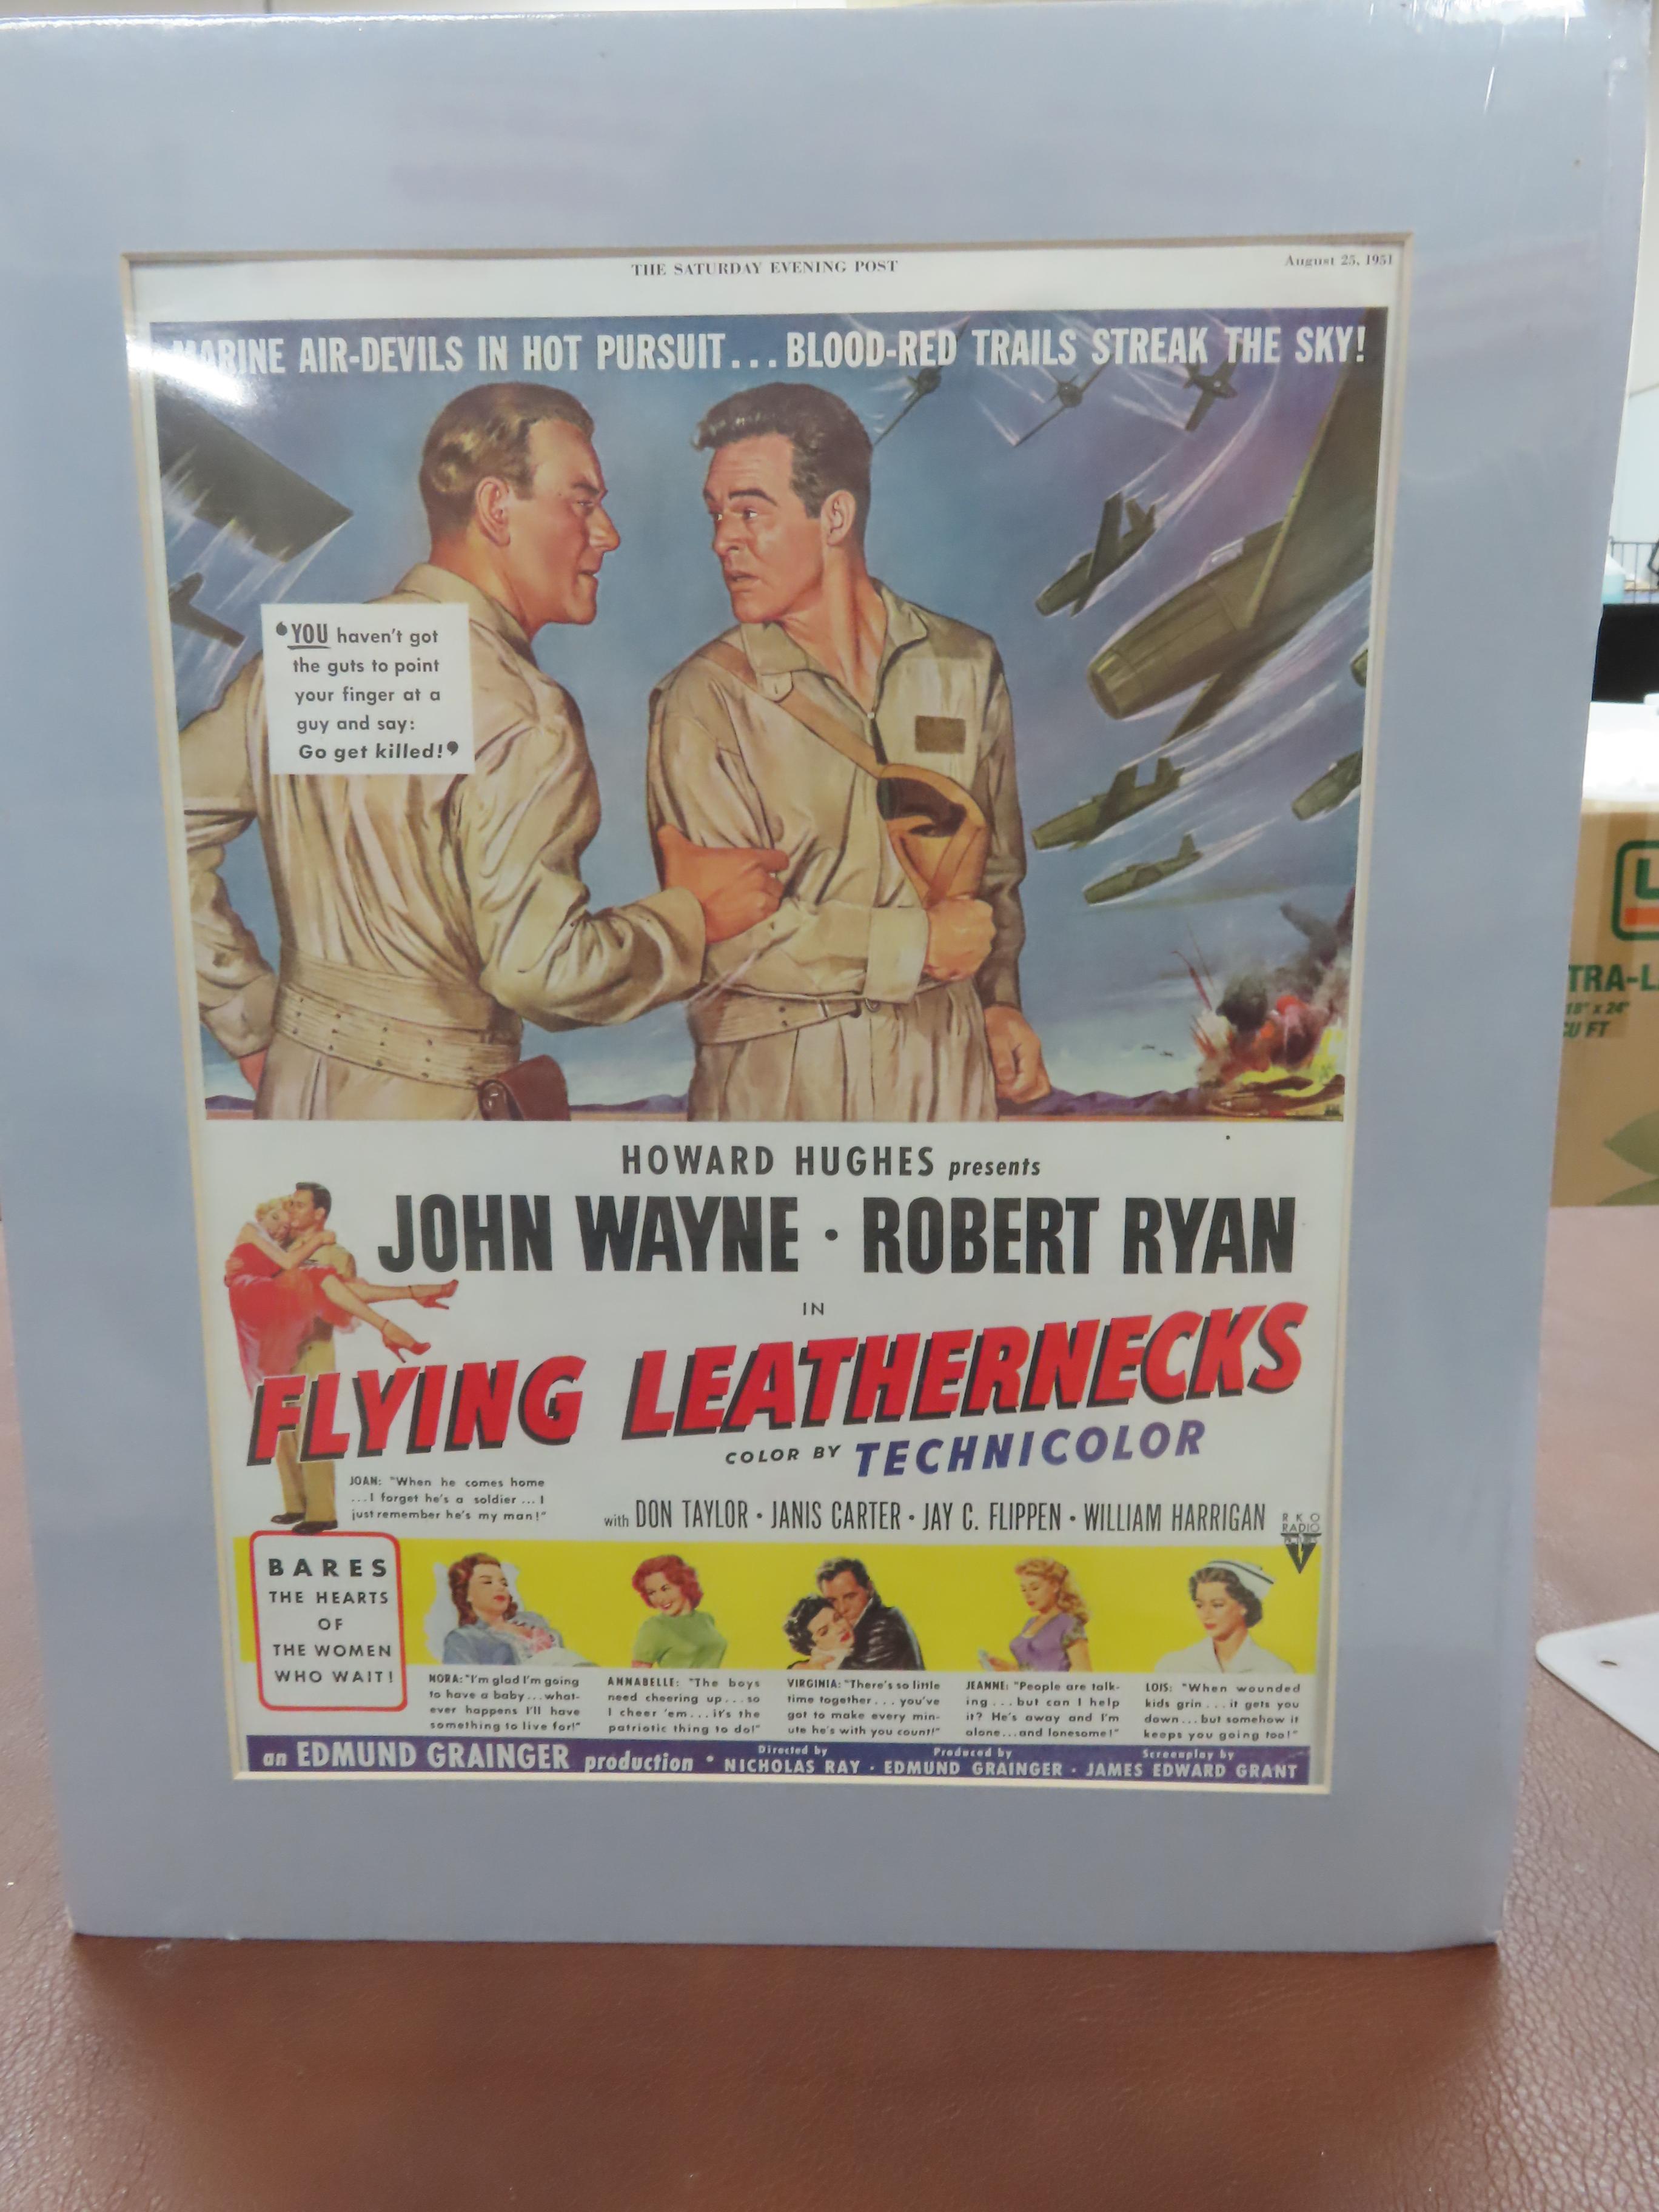 13"x16" Cut Out From August 25th, 1951 Saturday Evening Post, John Wayne Flying Leathernecks.